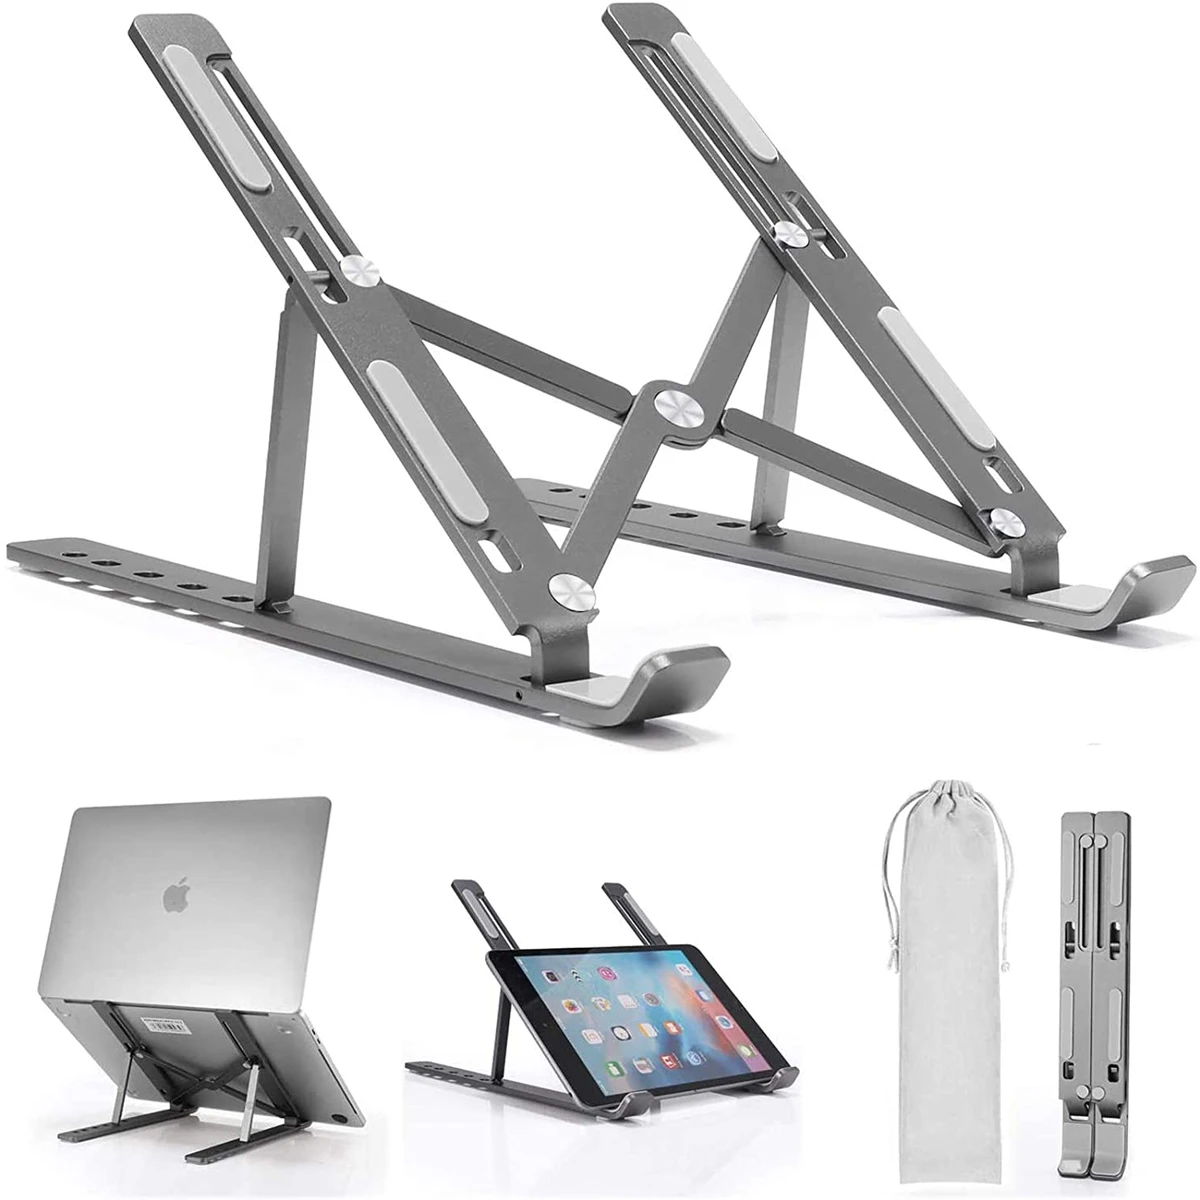 Laptop Stand Adjustable Aluminum Alloy Foldable Stand for 10-17 inch Tablets Notebook Laptop - Laptop Table